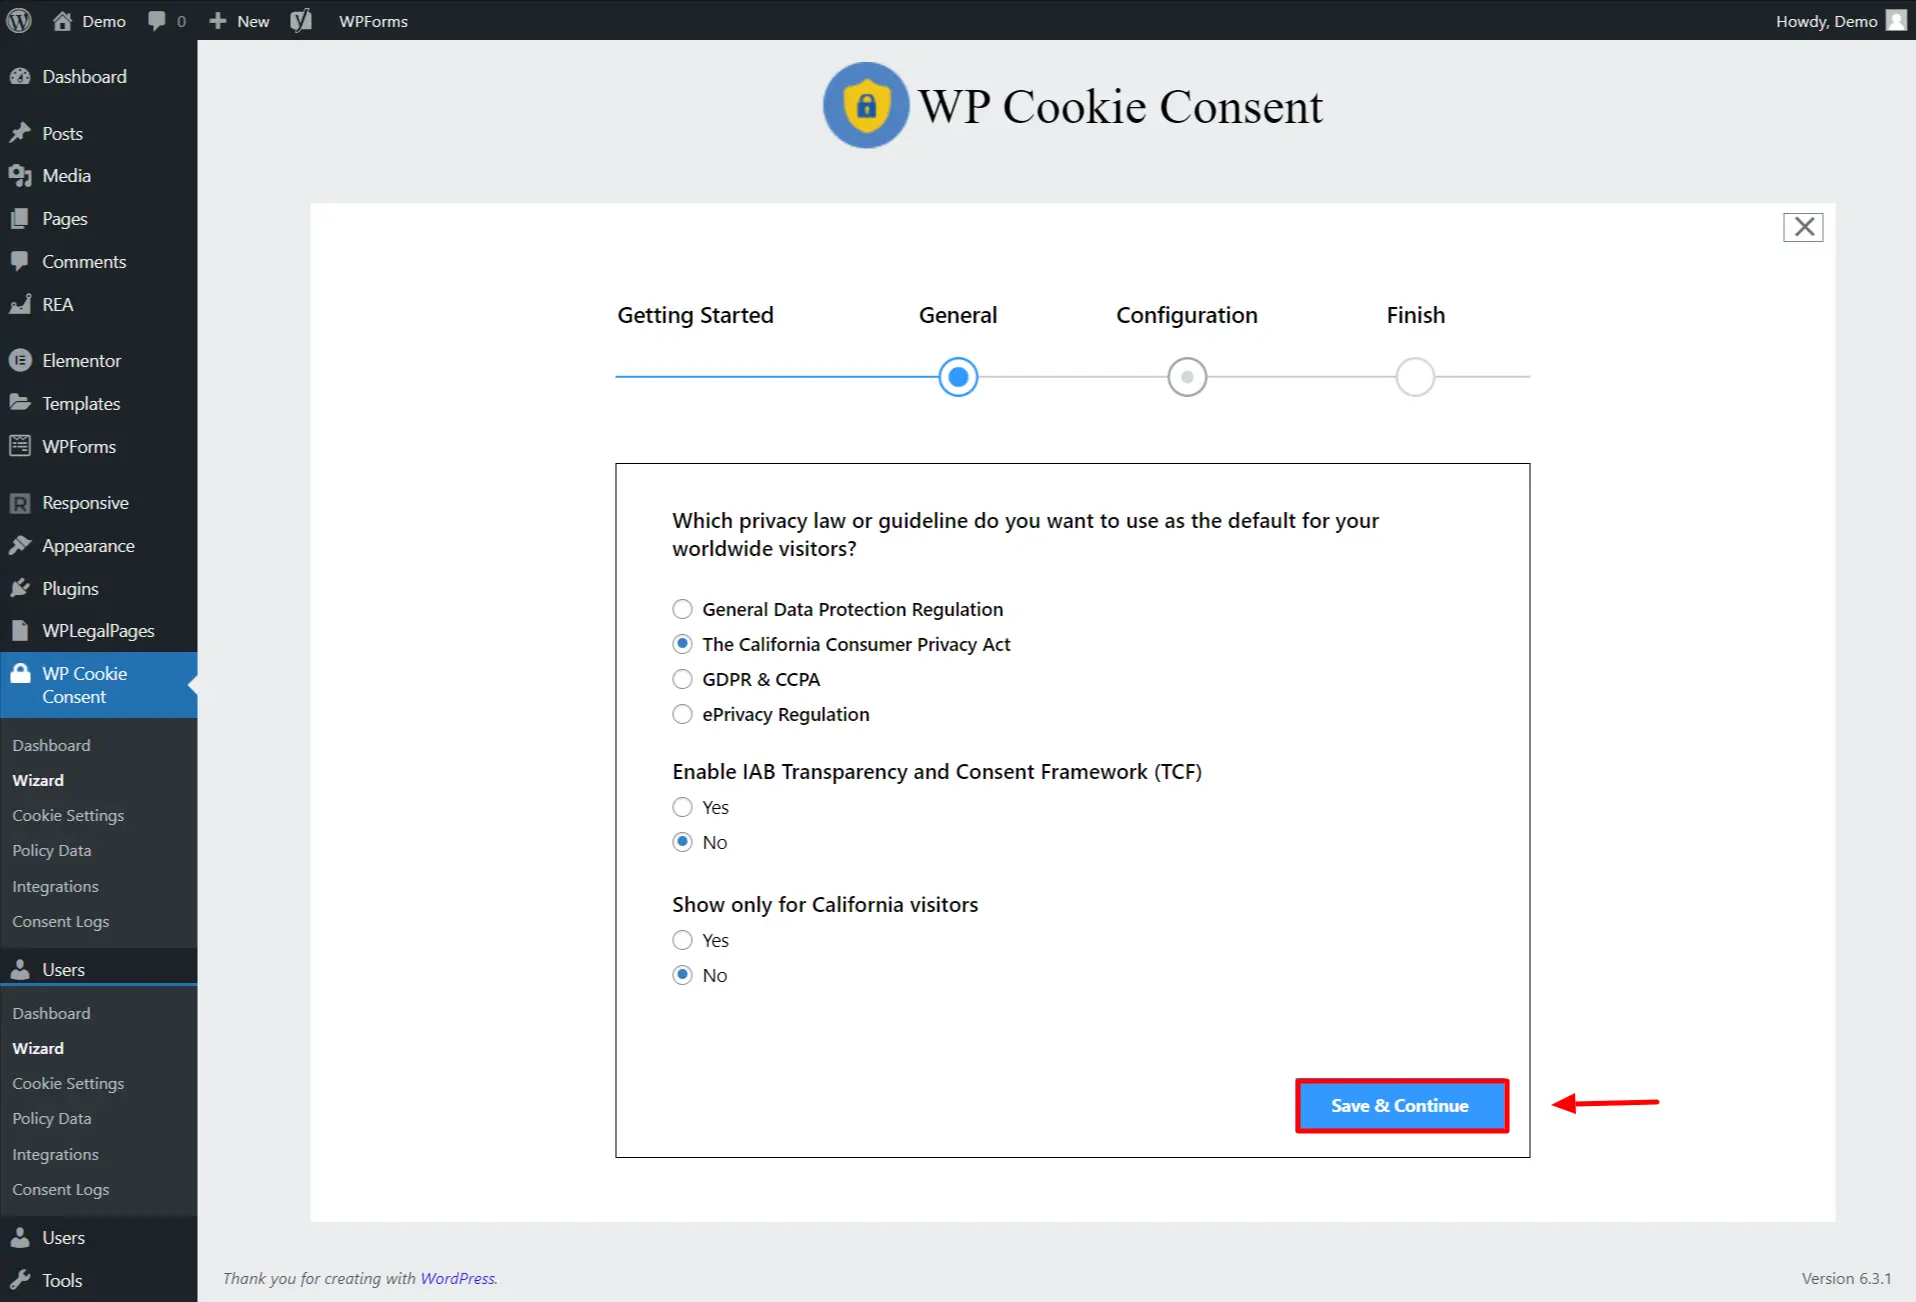 Cookie Consent Wizard General Settings